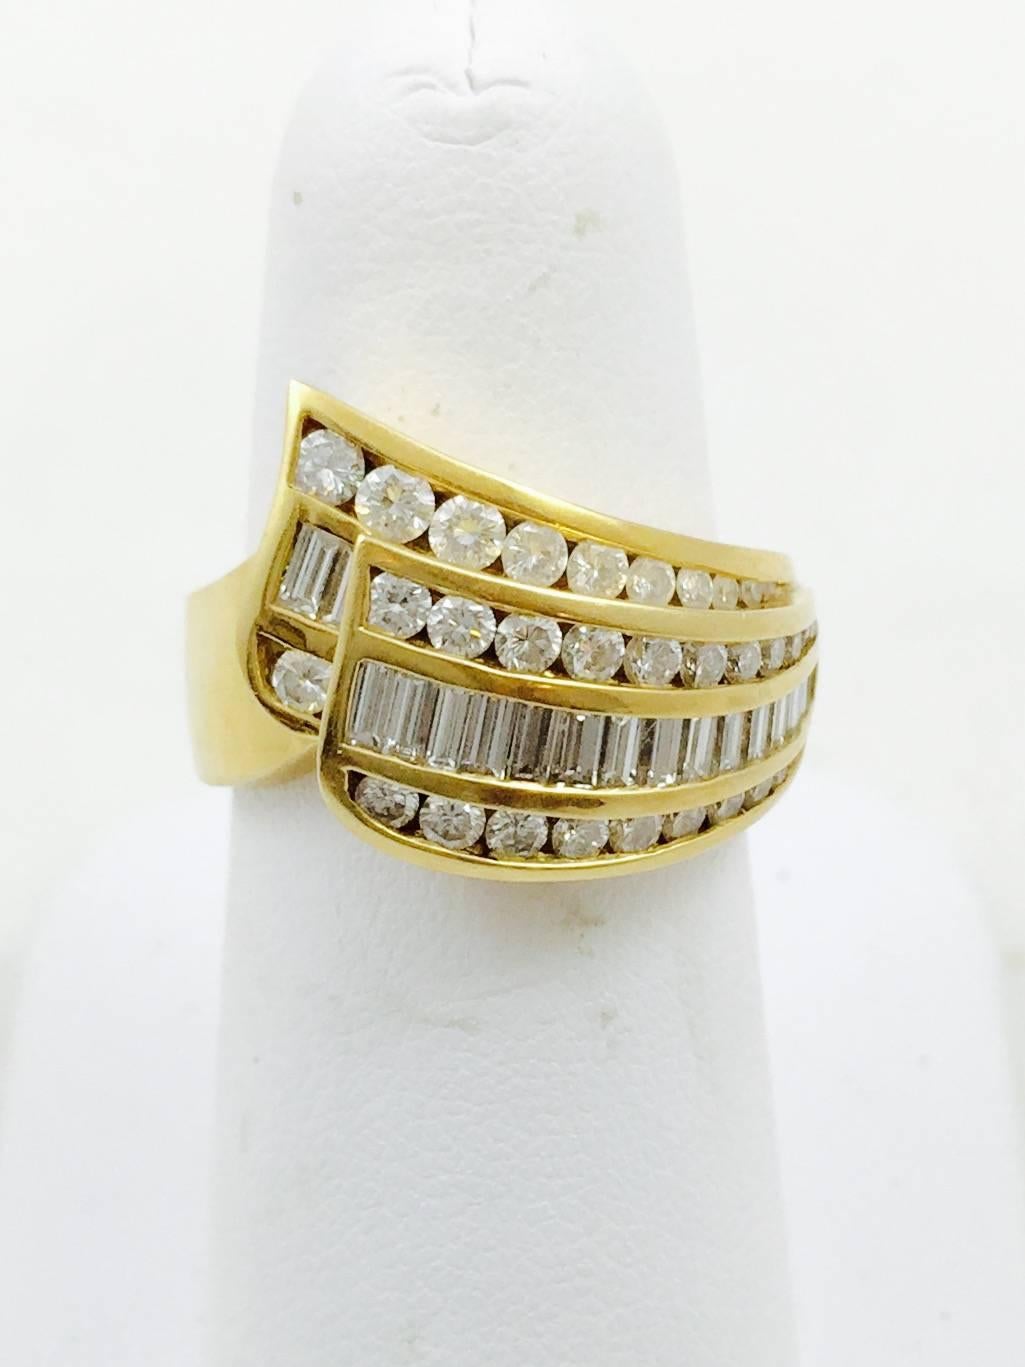 Since 1976, clients have adored the sophisticated designs of Charles Krypell.  His styles are timeless yet contemporary.  Magnificently represented in 18 karat yellow gold is a by-pass design ring artfully swirled and filled with diamonds on one